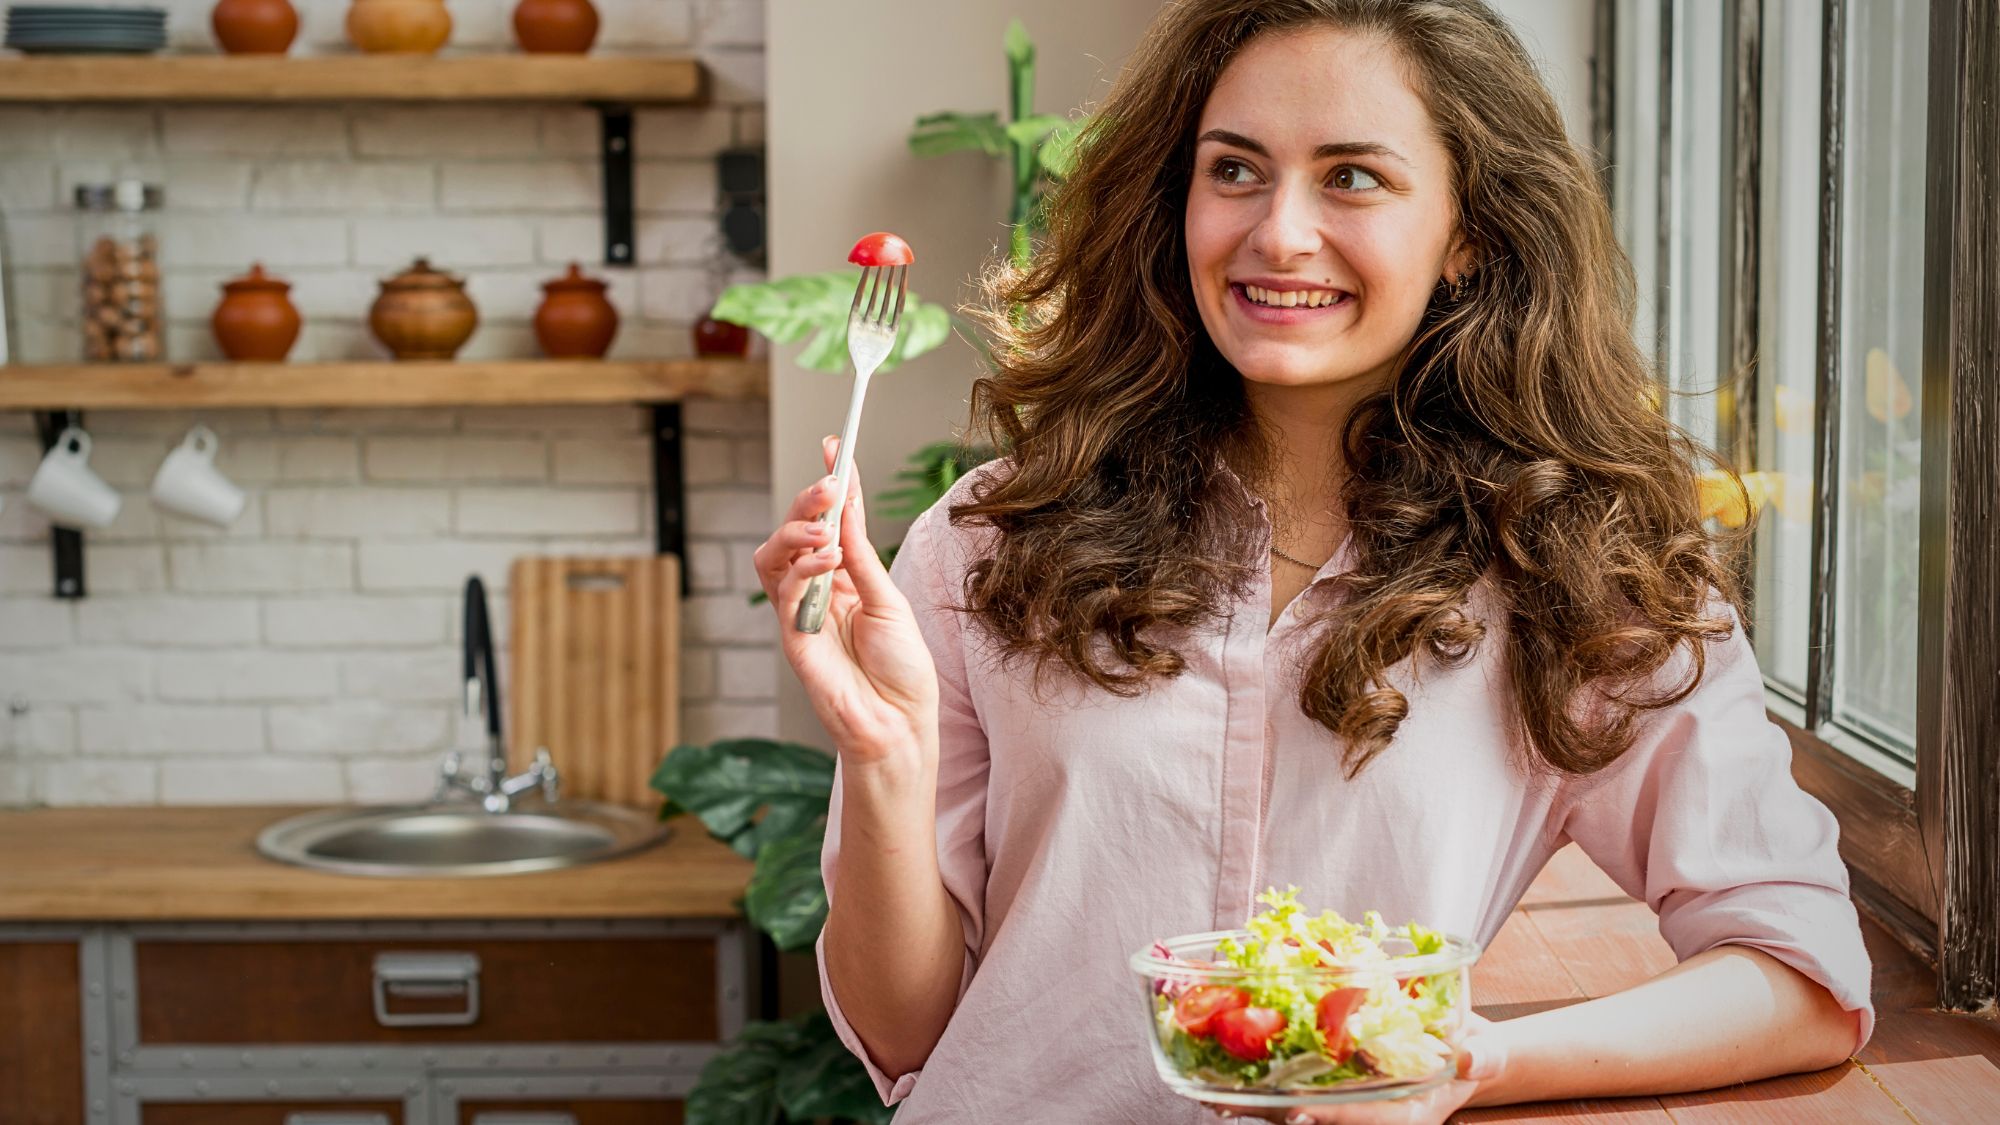 A woman holds a fresh salad in her hand, showcasing a healthy and appetizing delicious meals option from takeaway Stockport.